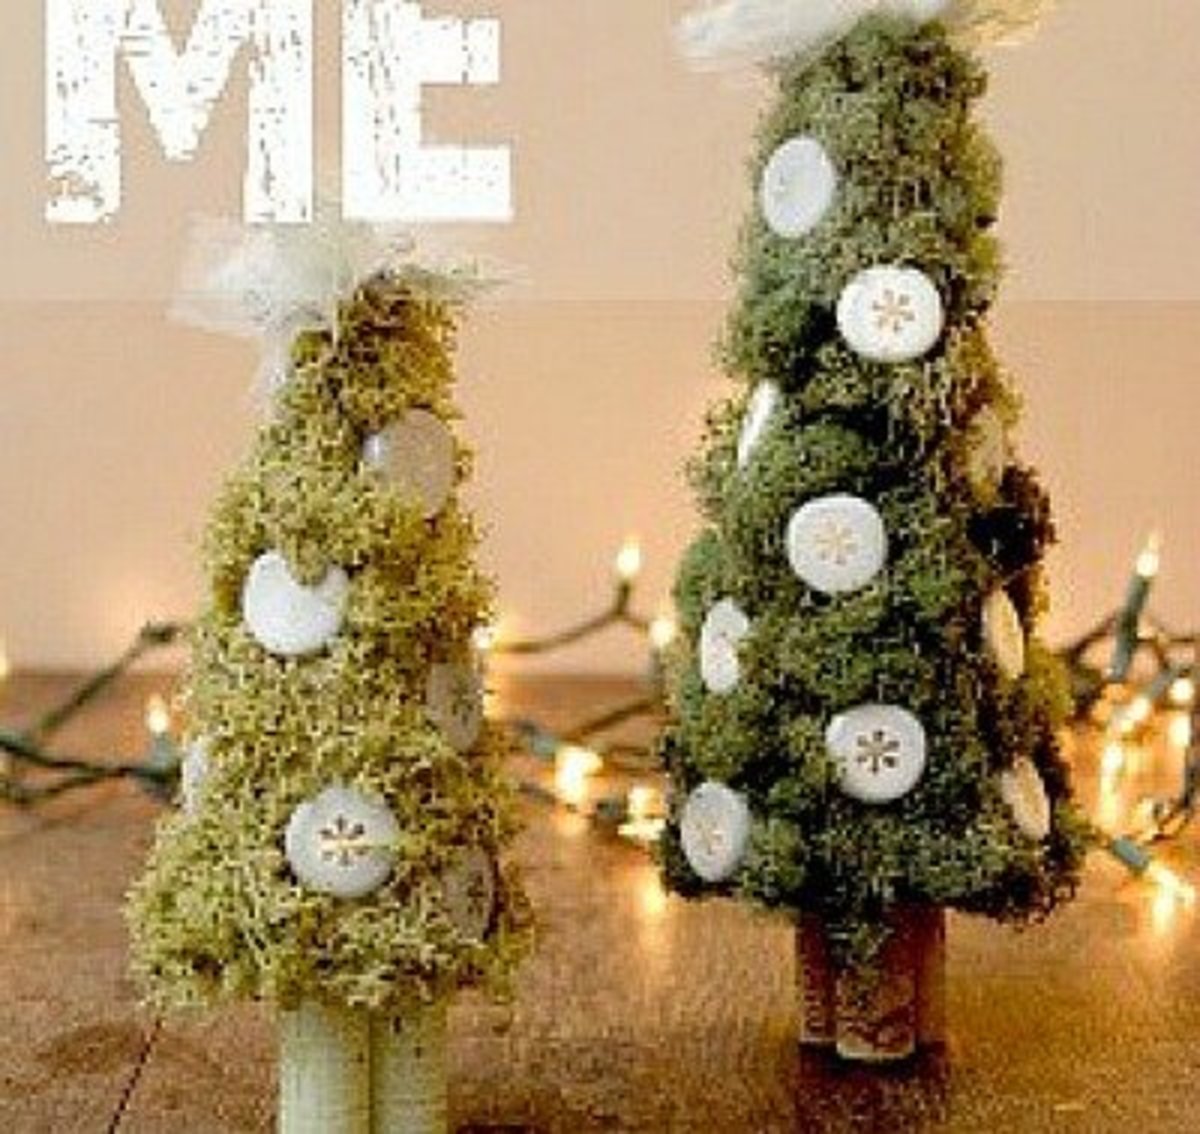 ways-to-use-moss-in-crafts